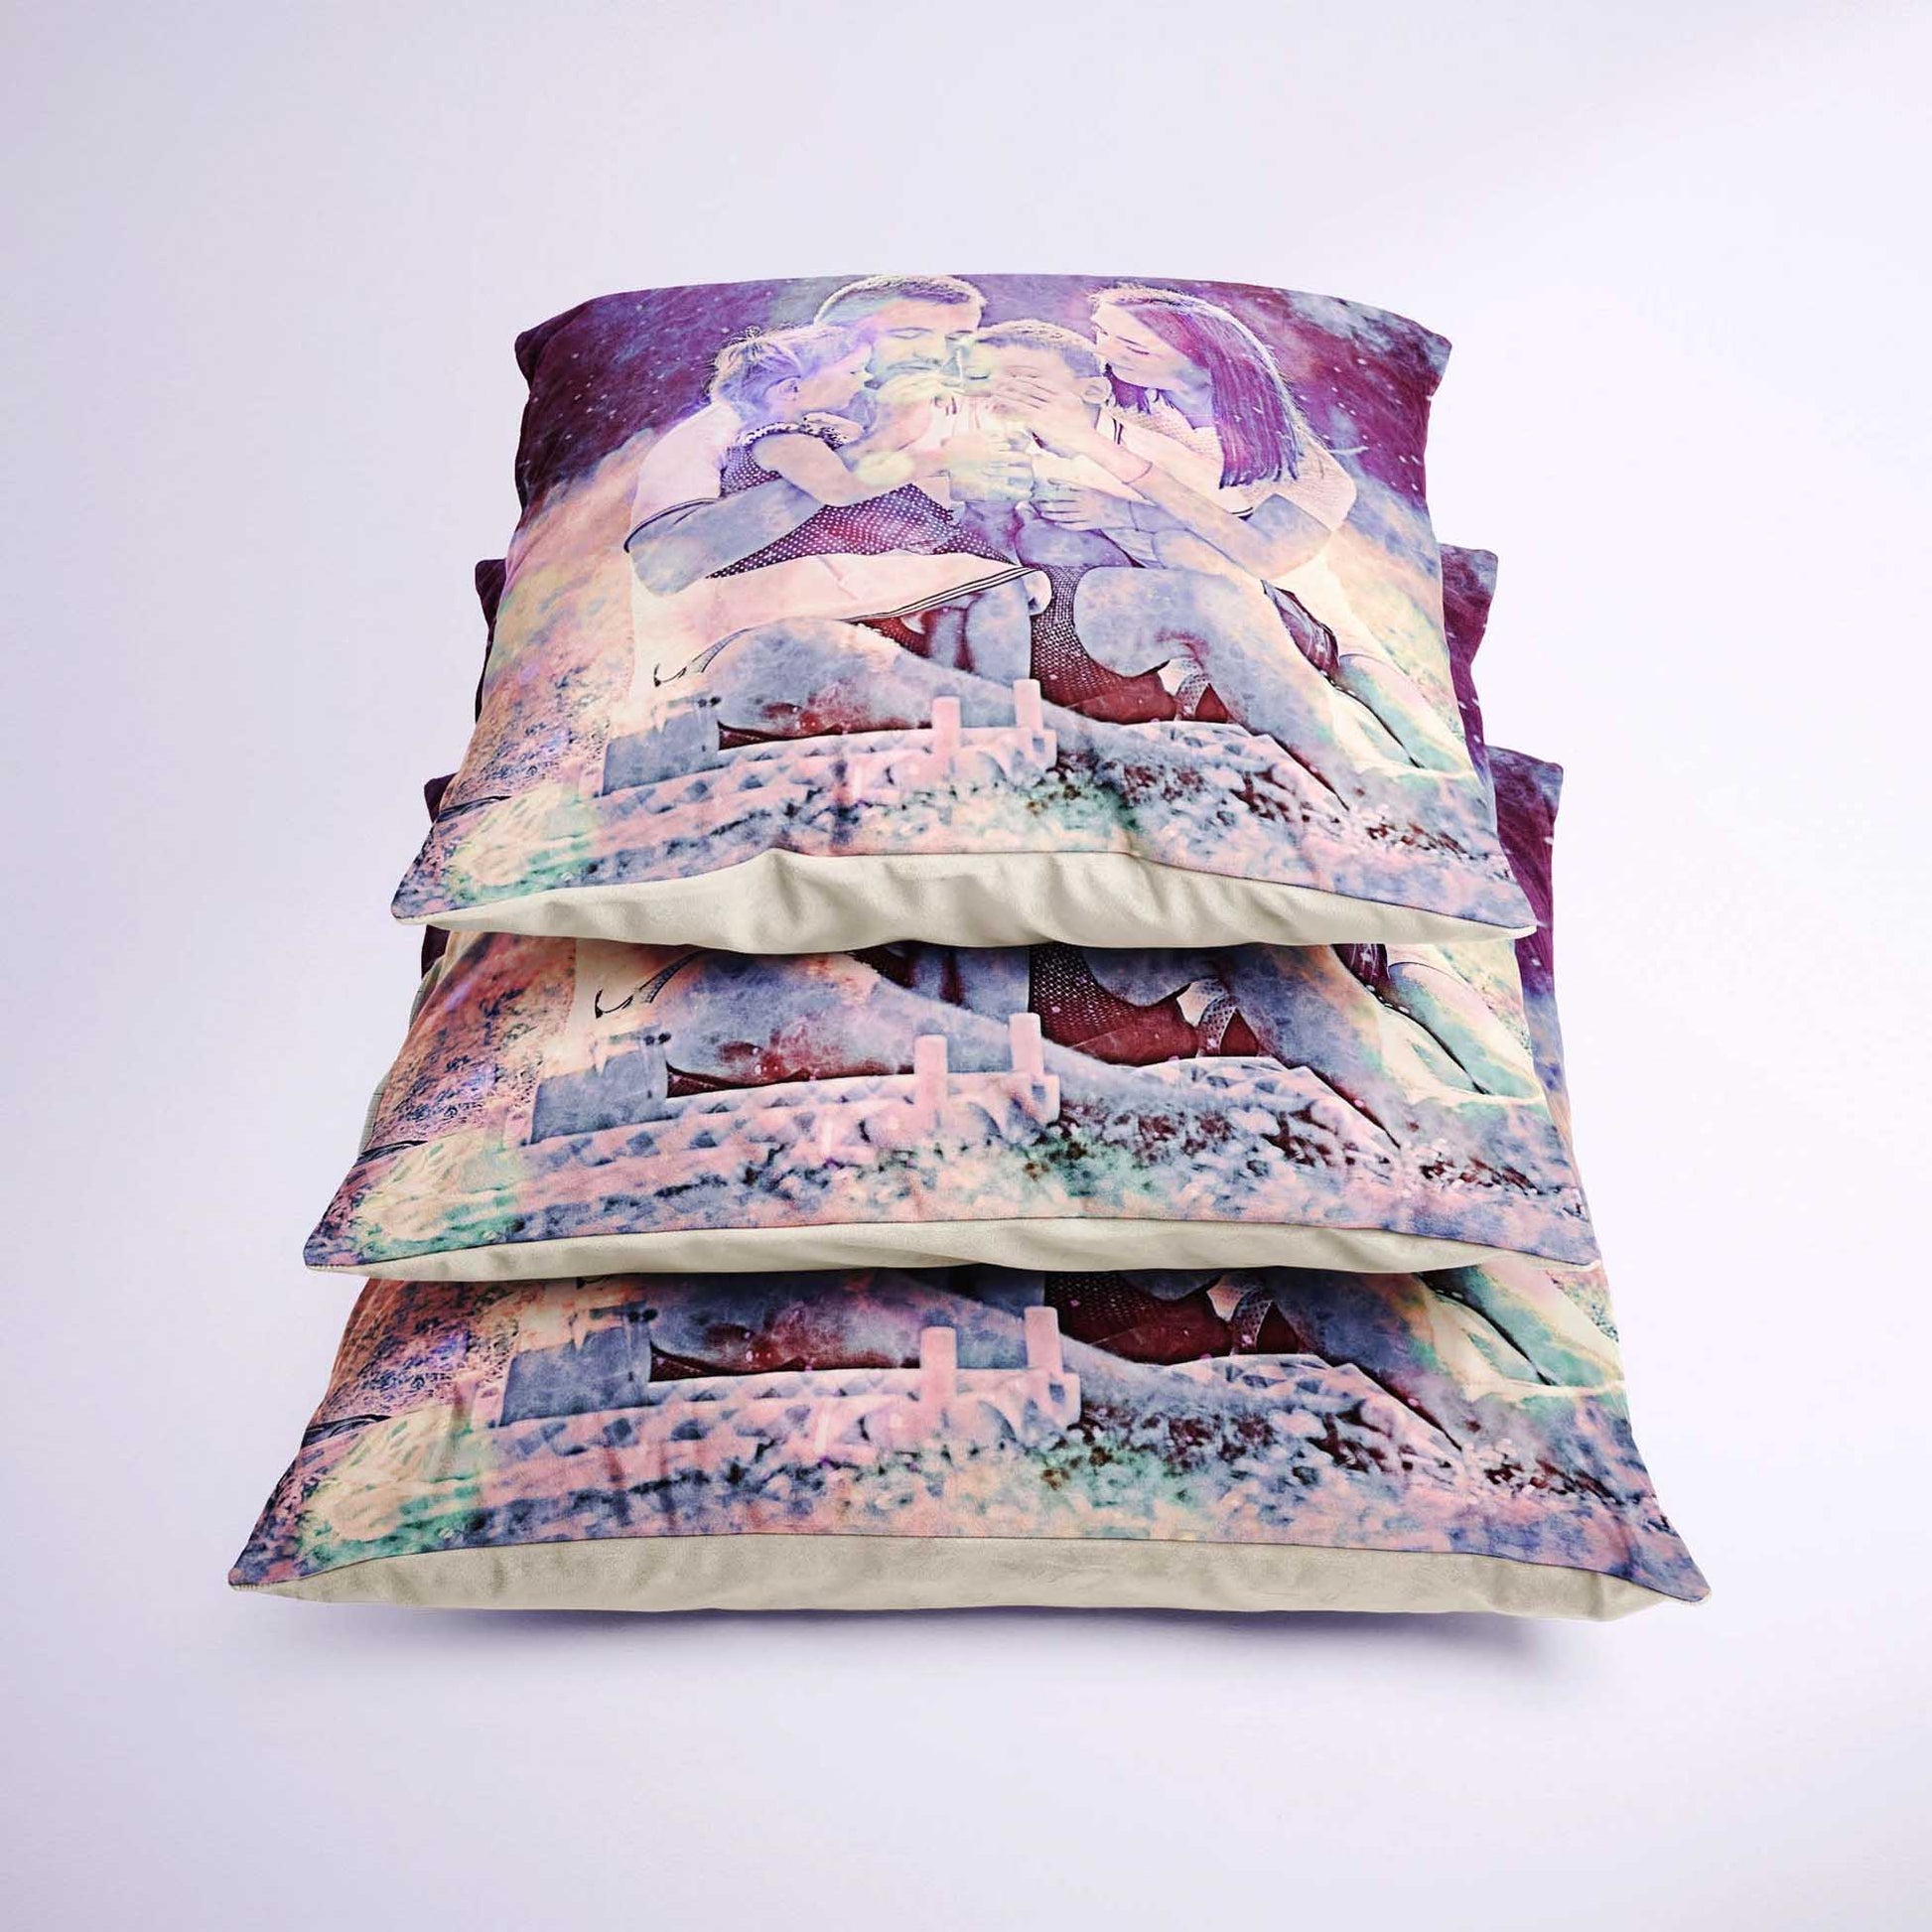 Elevate your interior design with the Personalised Special Purple FX Cushion. This custom-made cushion is a vibrant and bright statement piece for your home decor. Its unique and original print, created from your photo